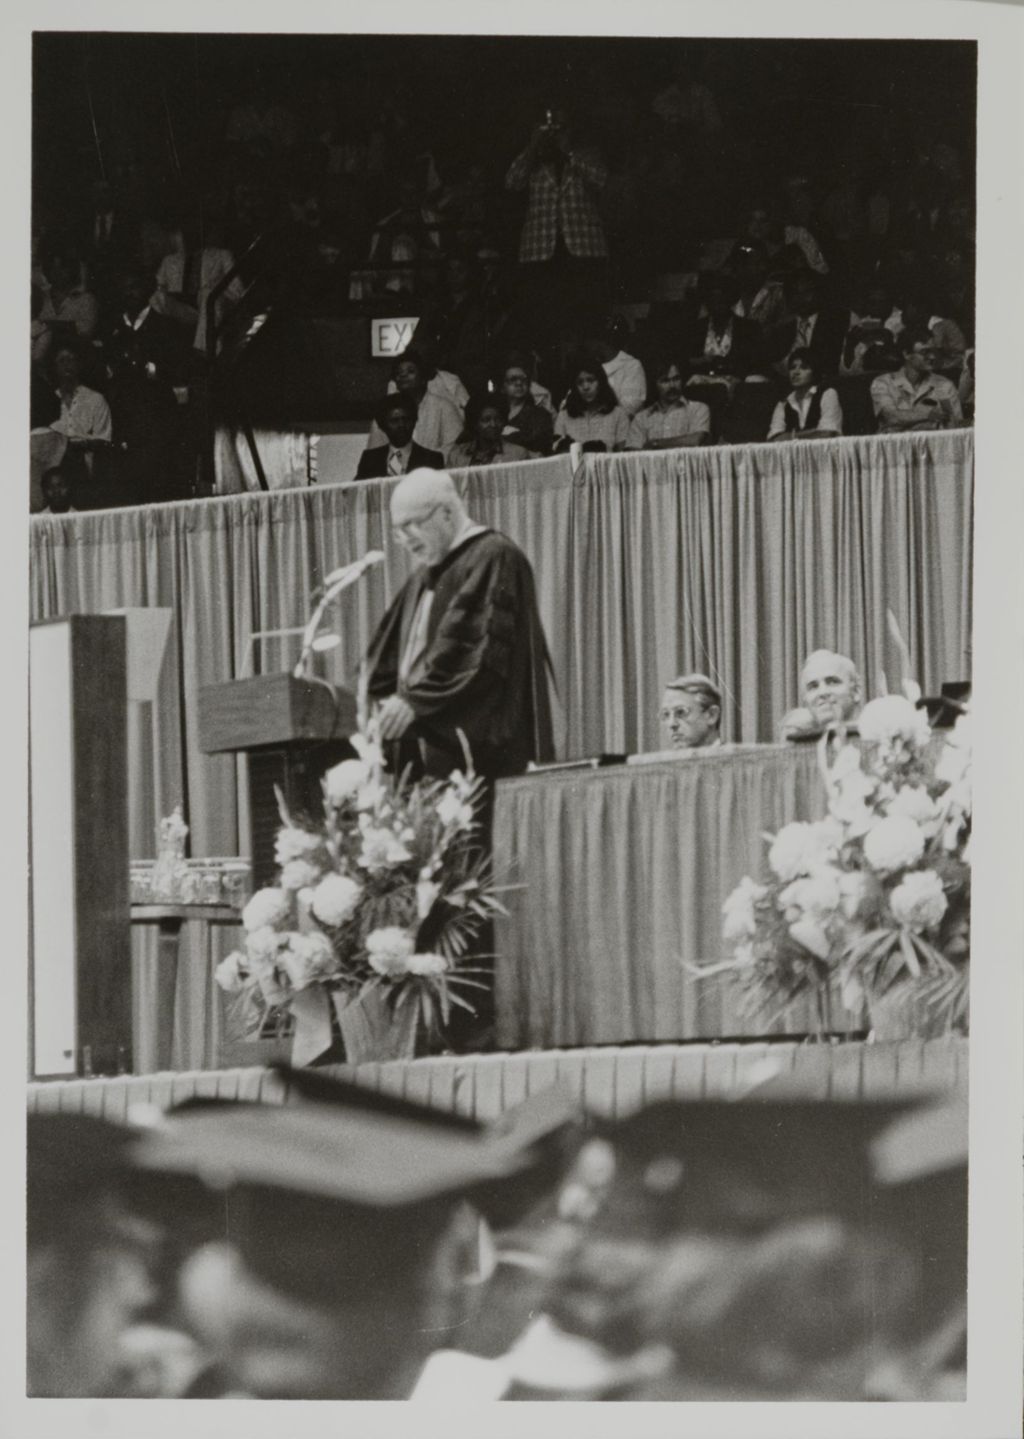 Chancellor Donald H. Riddle addressing the audience at the graduation ceremony